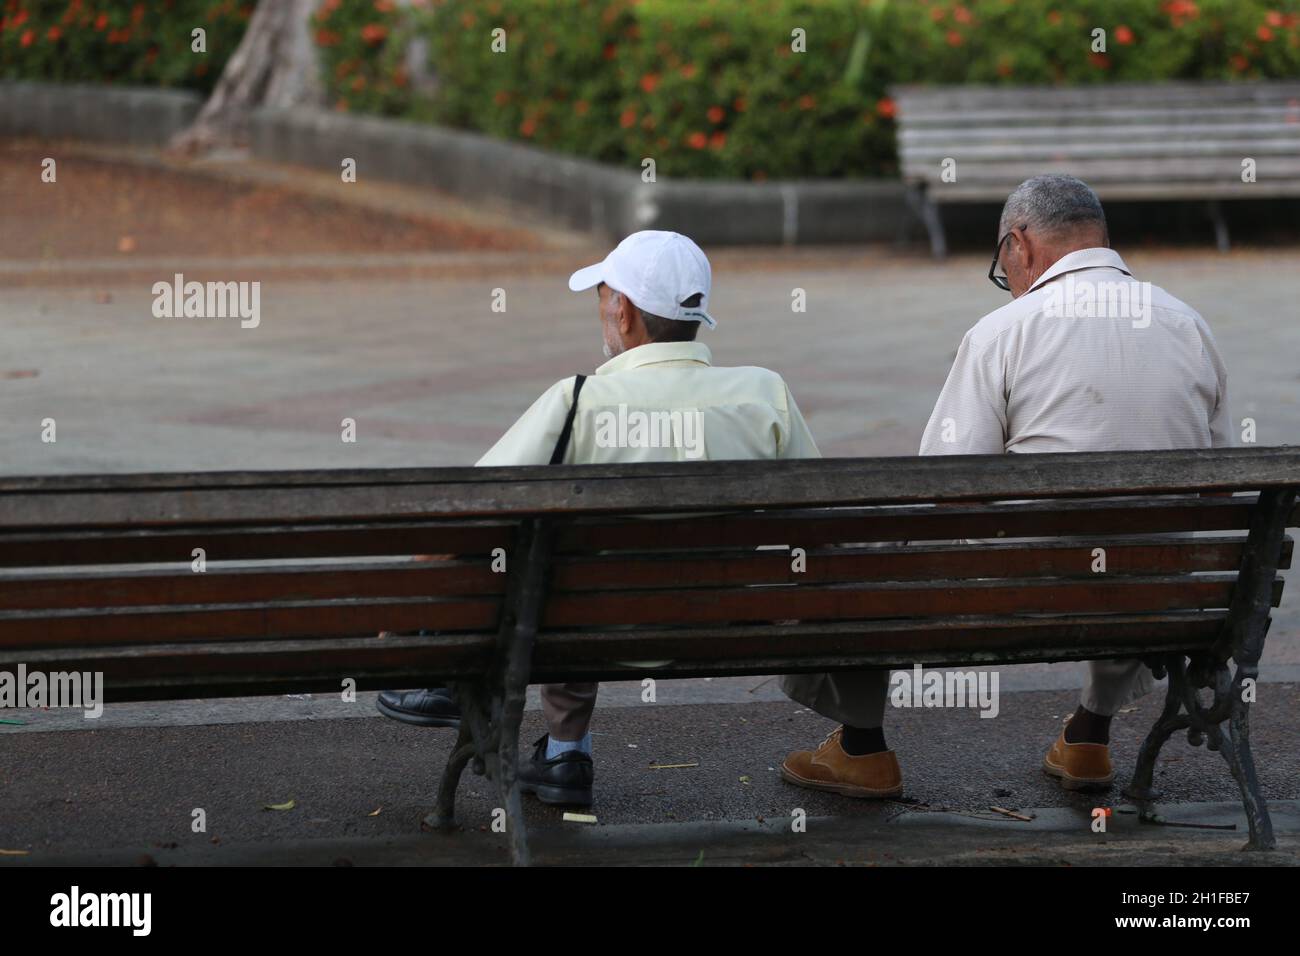 salvador, bahia / brazil - april 11, 2018: Elderly people are seen on the square bench in the city of Salvador. *** Local Caption *** Stock Photo